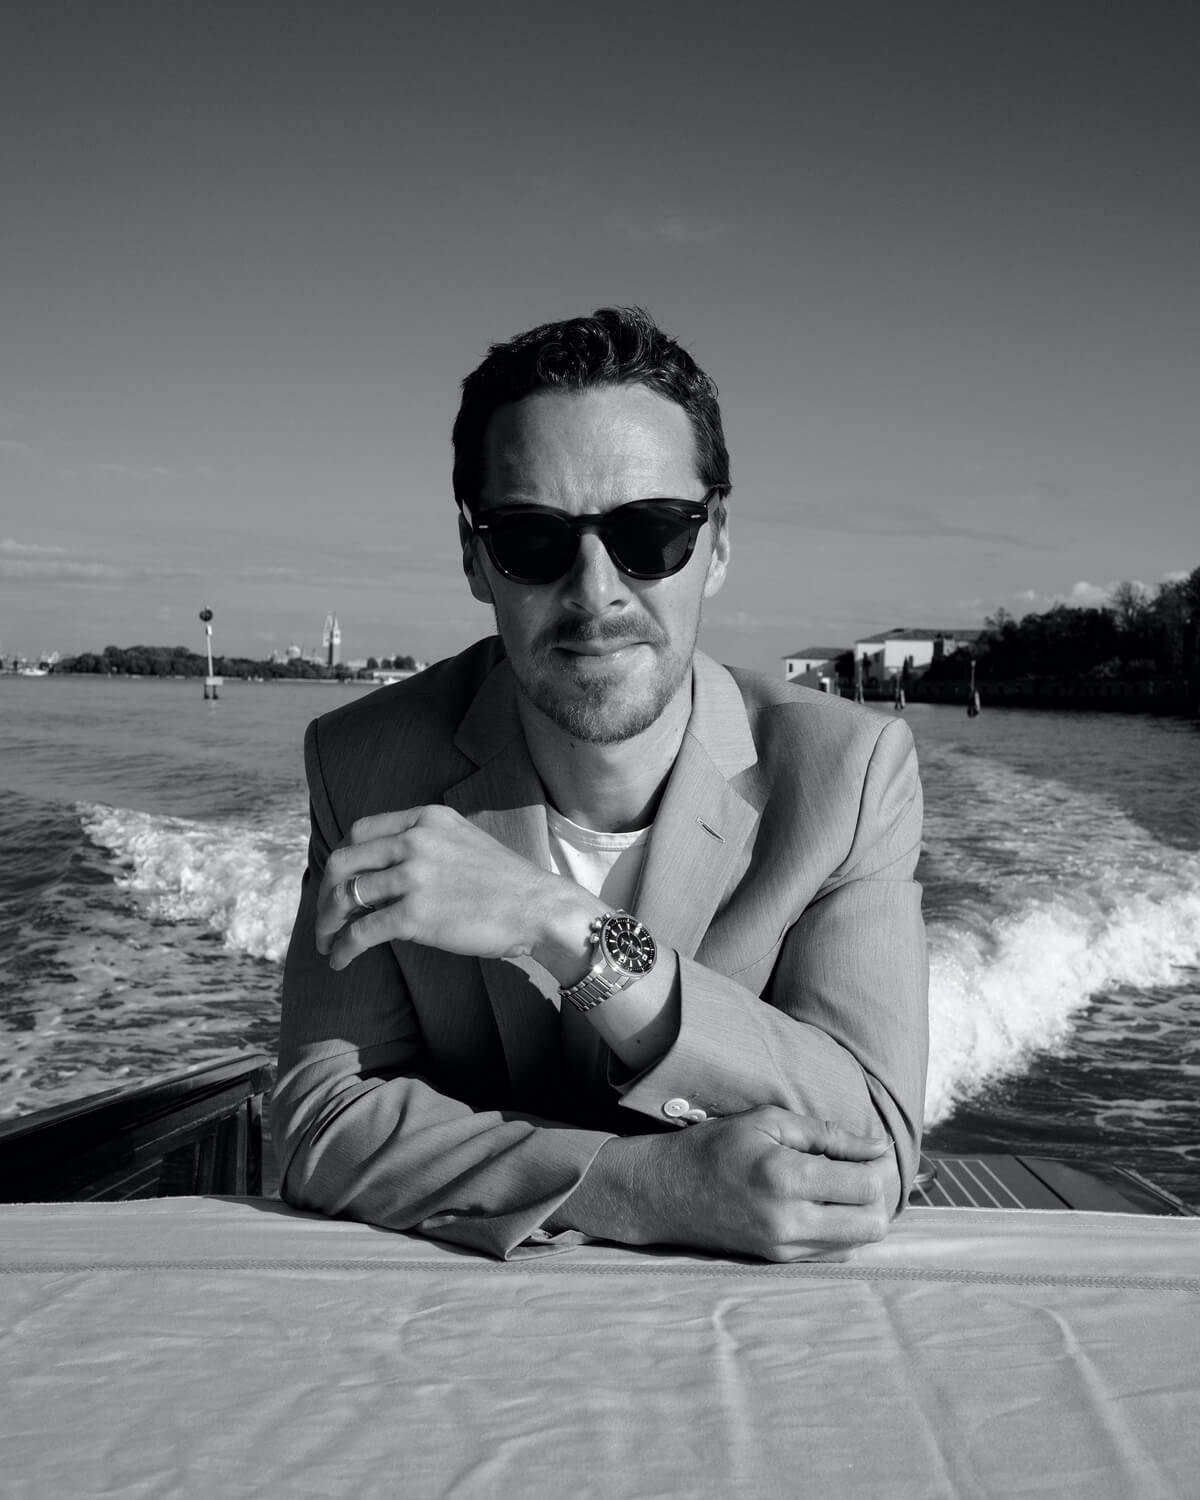 Benedict Cumberbatch wears a light suit, dark glasses, and a watch. He poses in the middle of a boat, speeding around Venice.